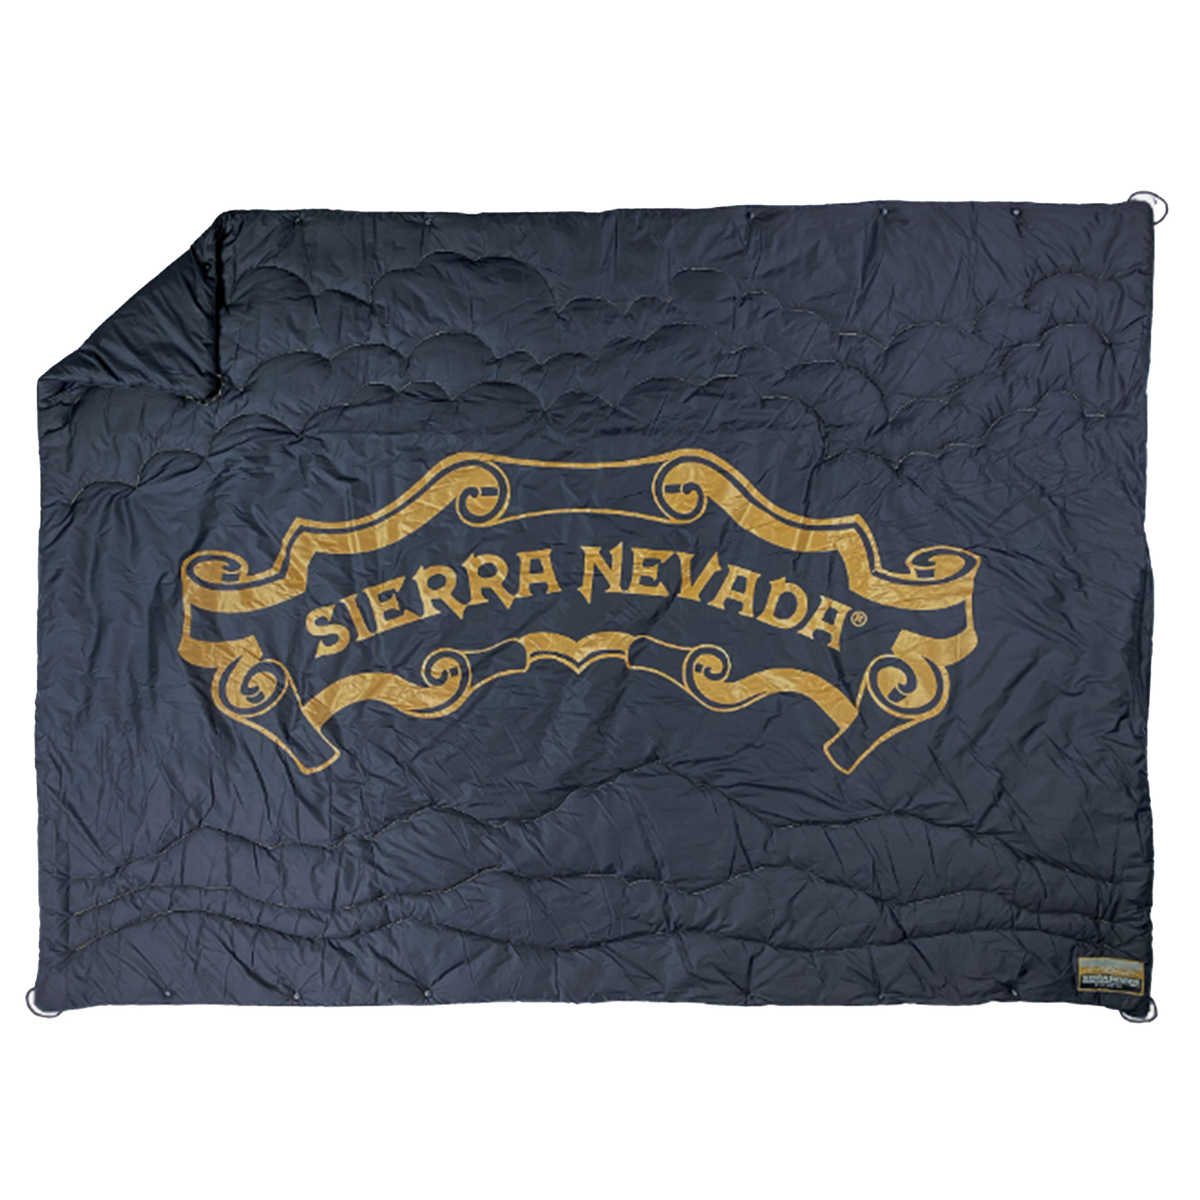 Sierra Nevada packable blanket spread out to show scroll logo